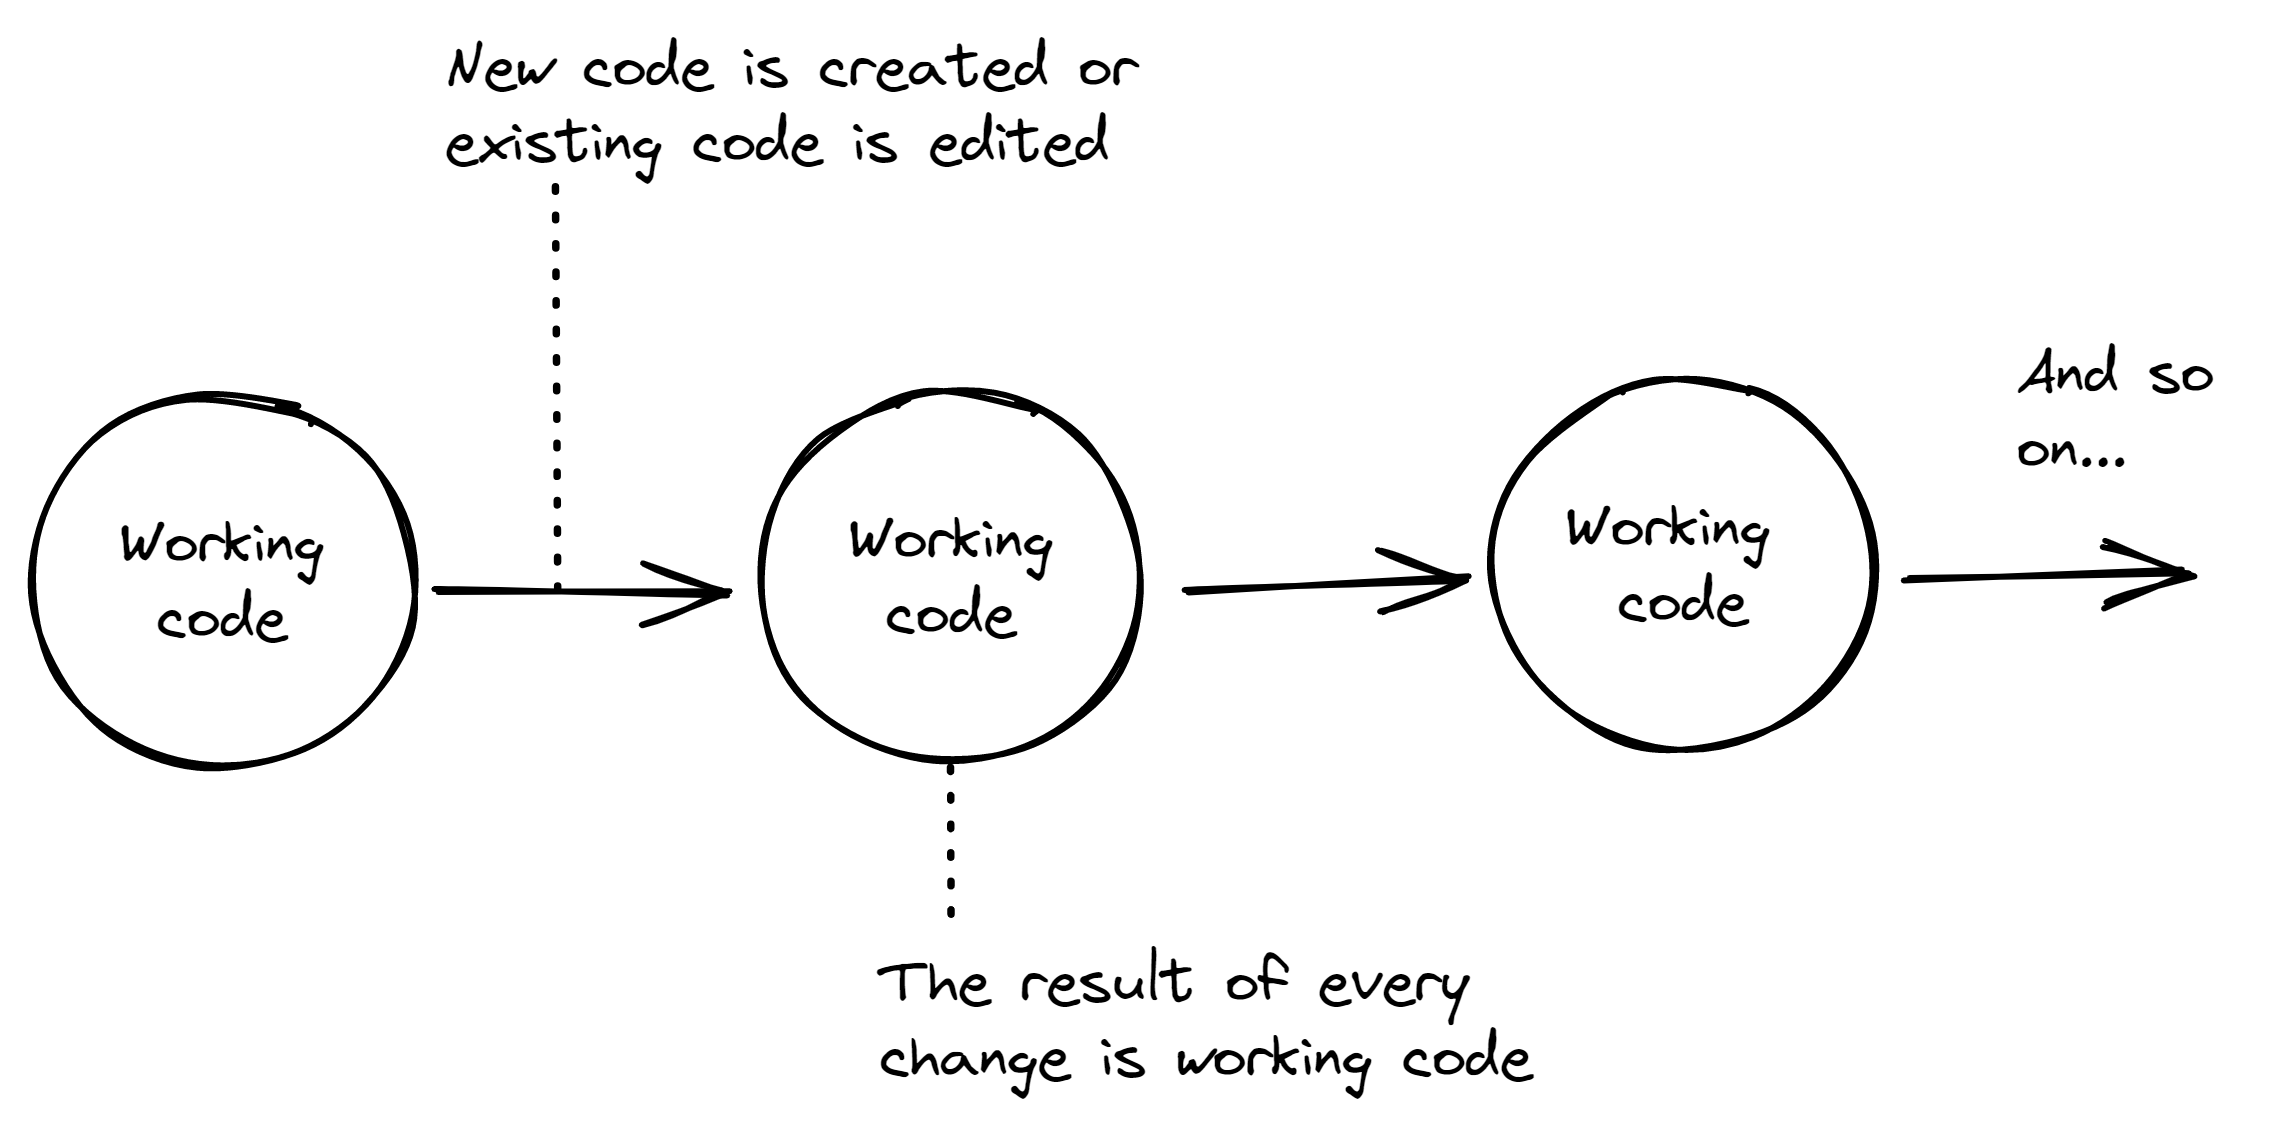 The process of development is taking your code through a series of changes from working state to working state